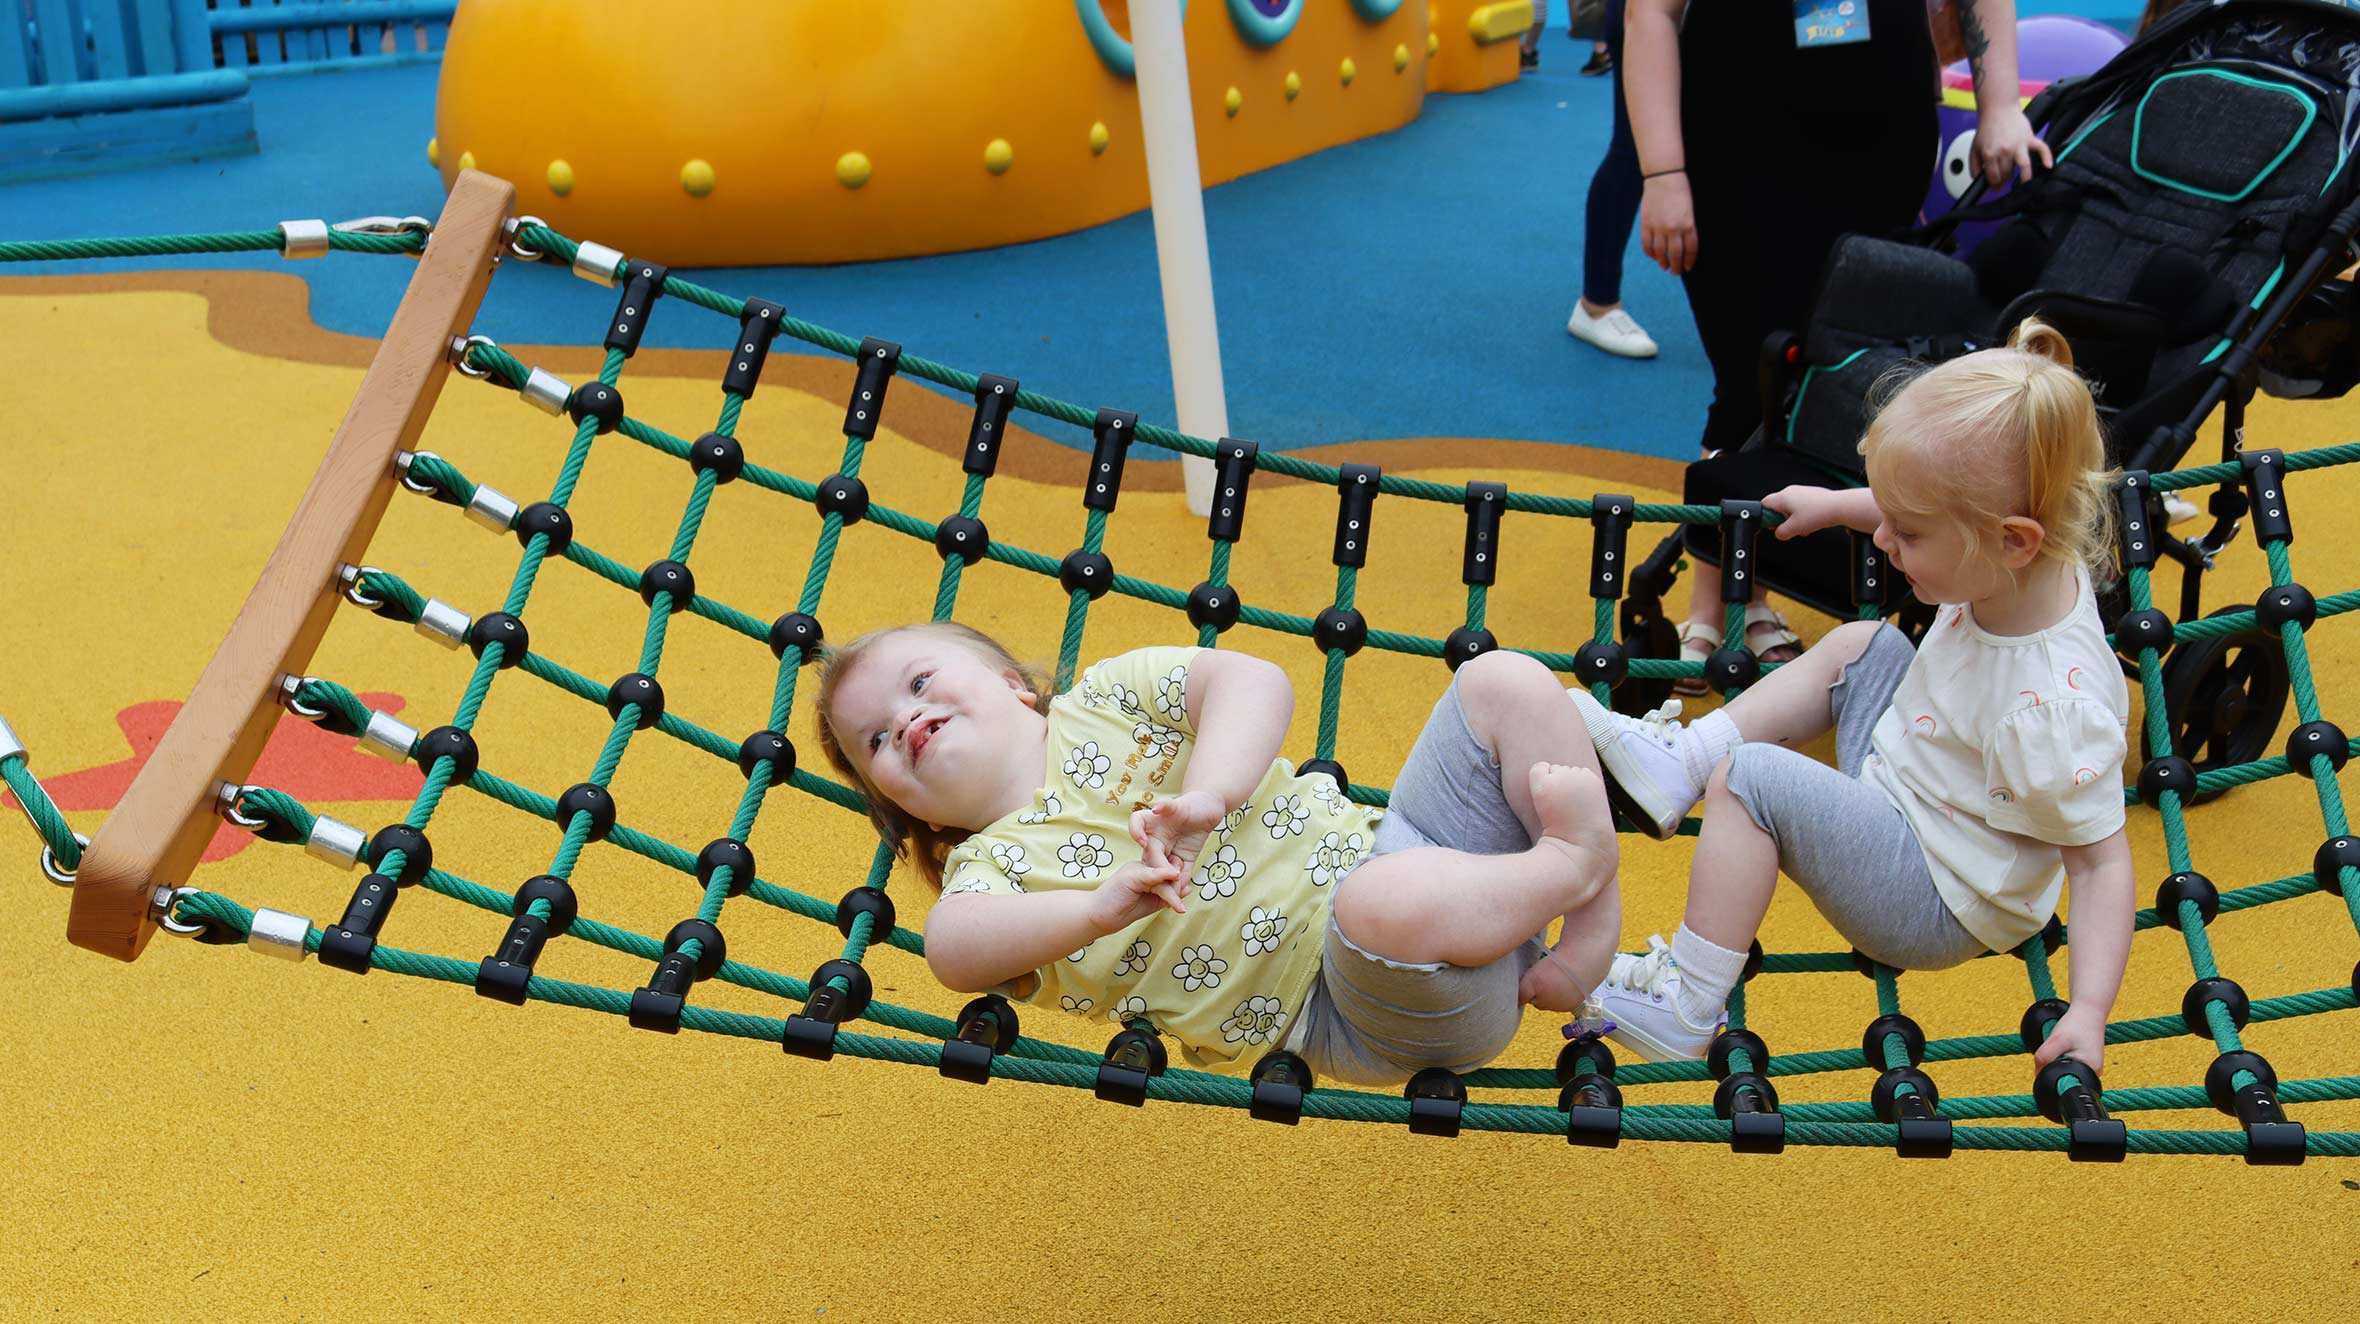 Bella-Rose laying in a net hammock during her trip to CBeebies Land.